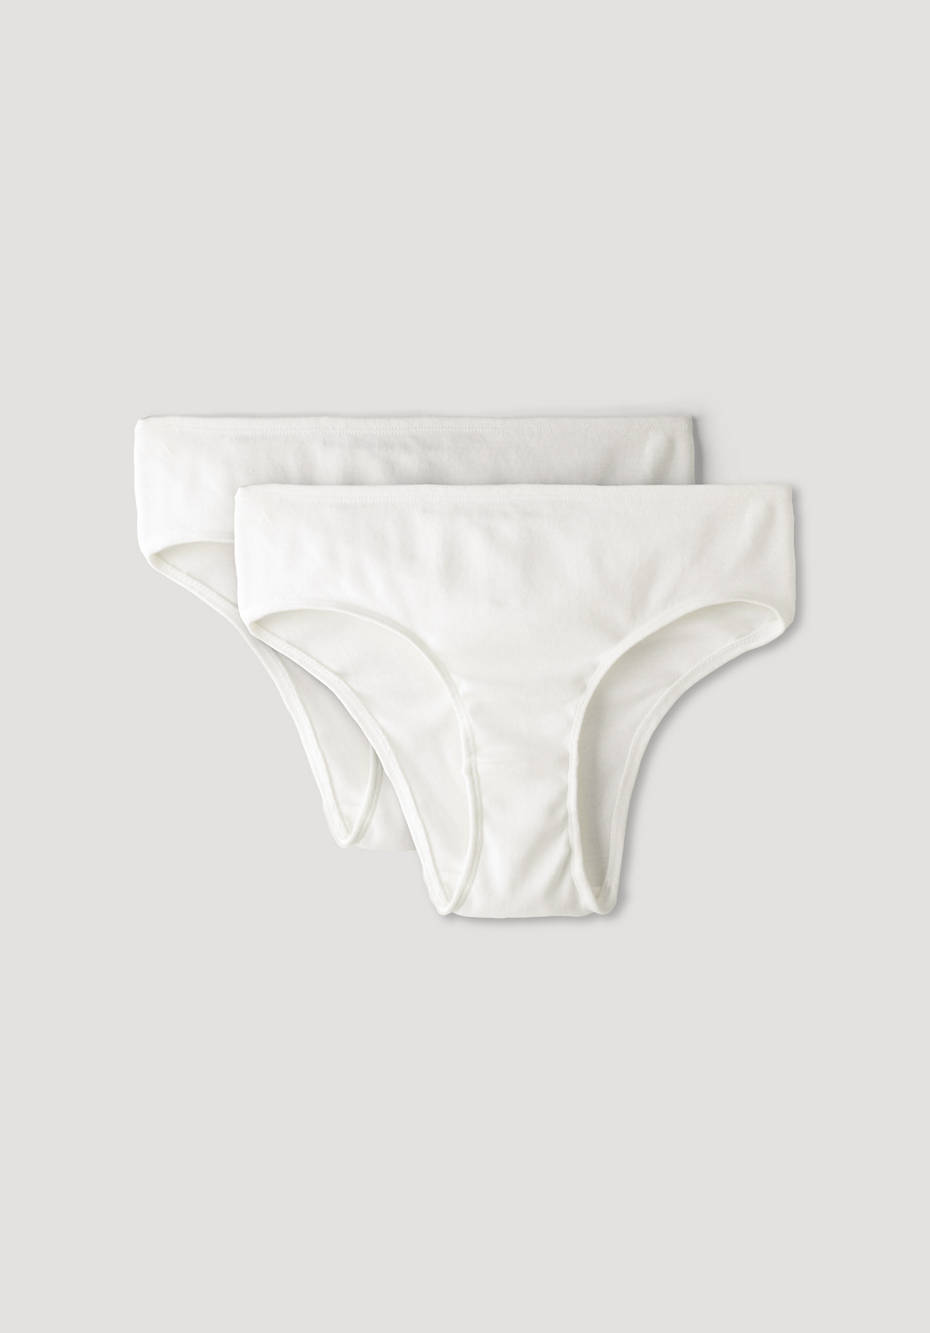 Regular cut briefs in a set of 2 made from pure organic cotton